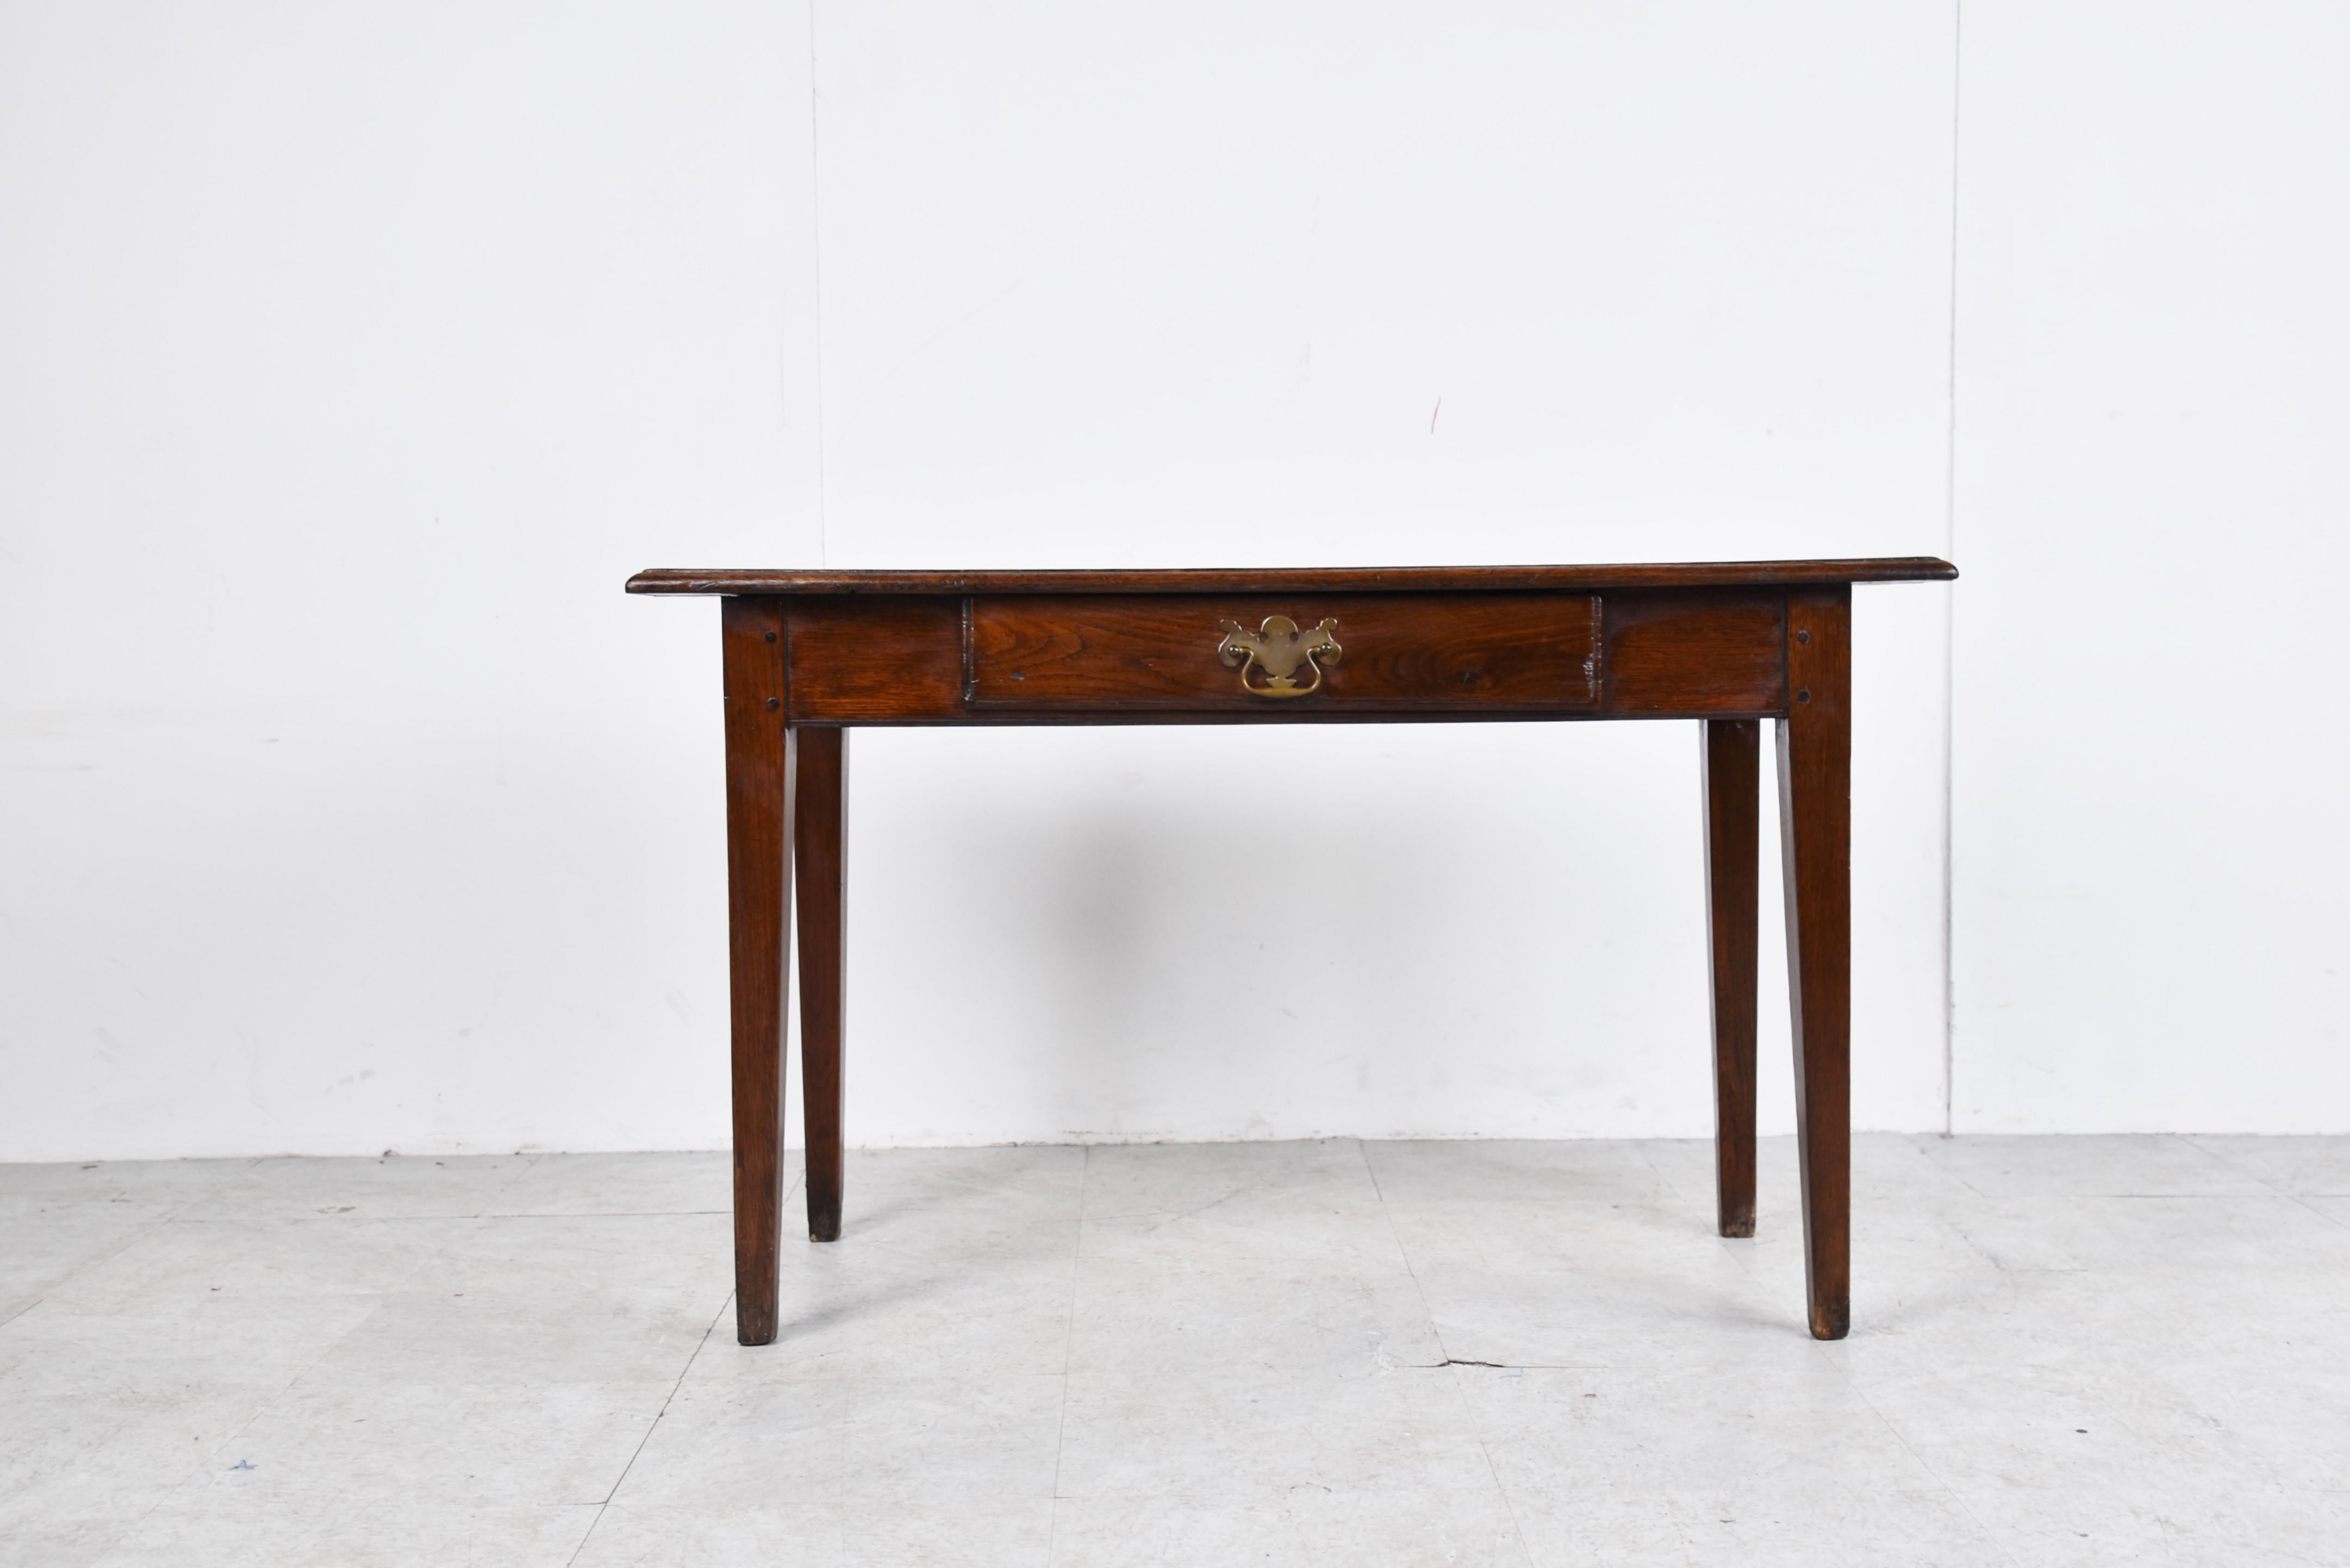 Antique mid-19th century hall table or console table.

Beautiful and simple rustic table with a nice brass handle. 

Good condition, with beautiful aging.

1850s- France

Dimensions:
Height: 65cm/25.59